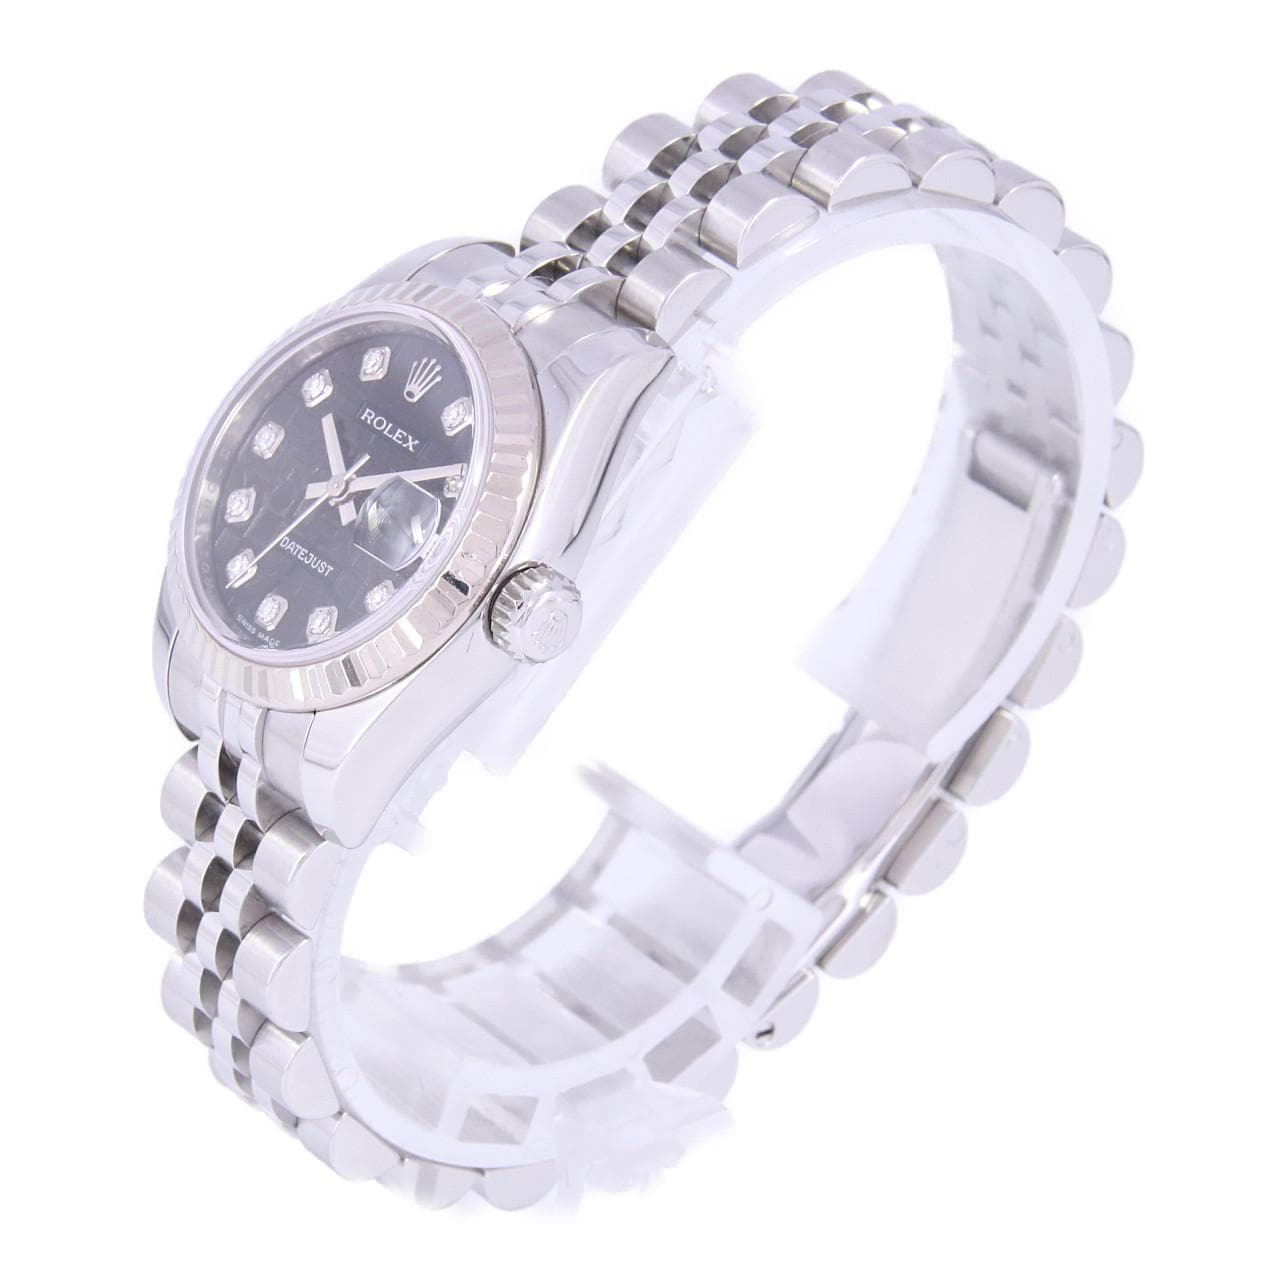 ROLEX Datejust 179174G SSxWG Automatic M number